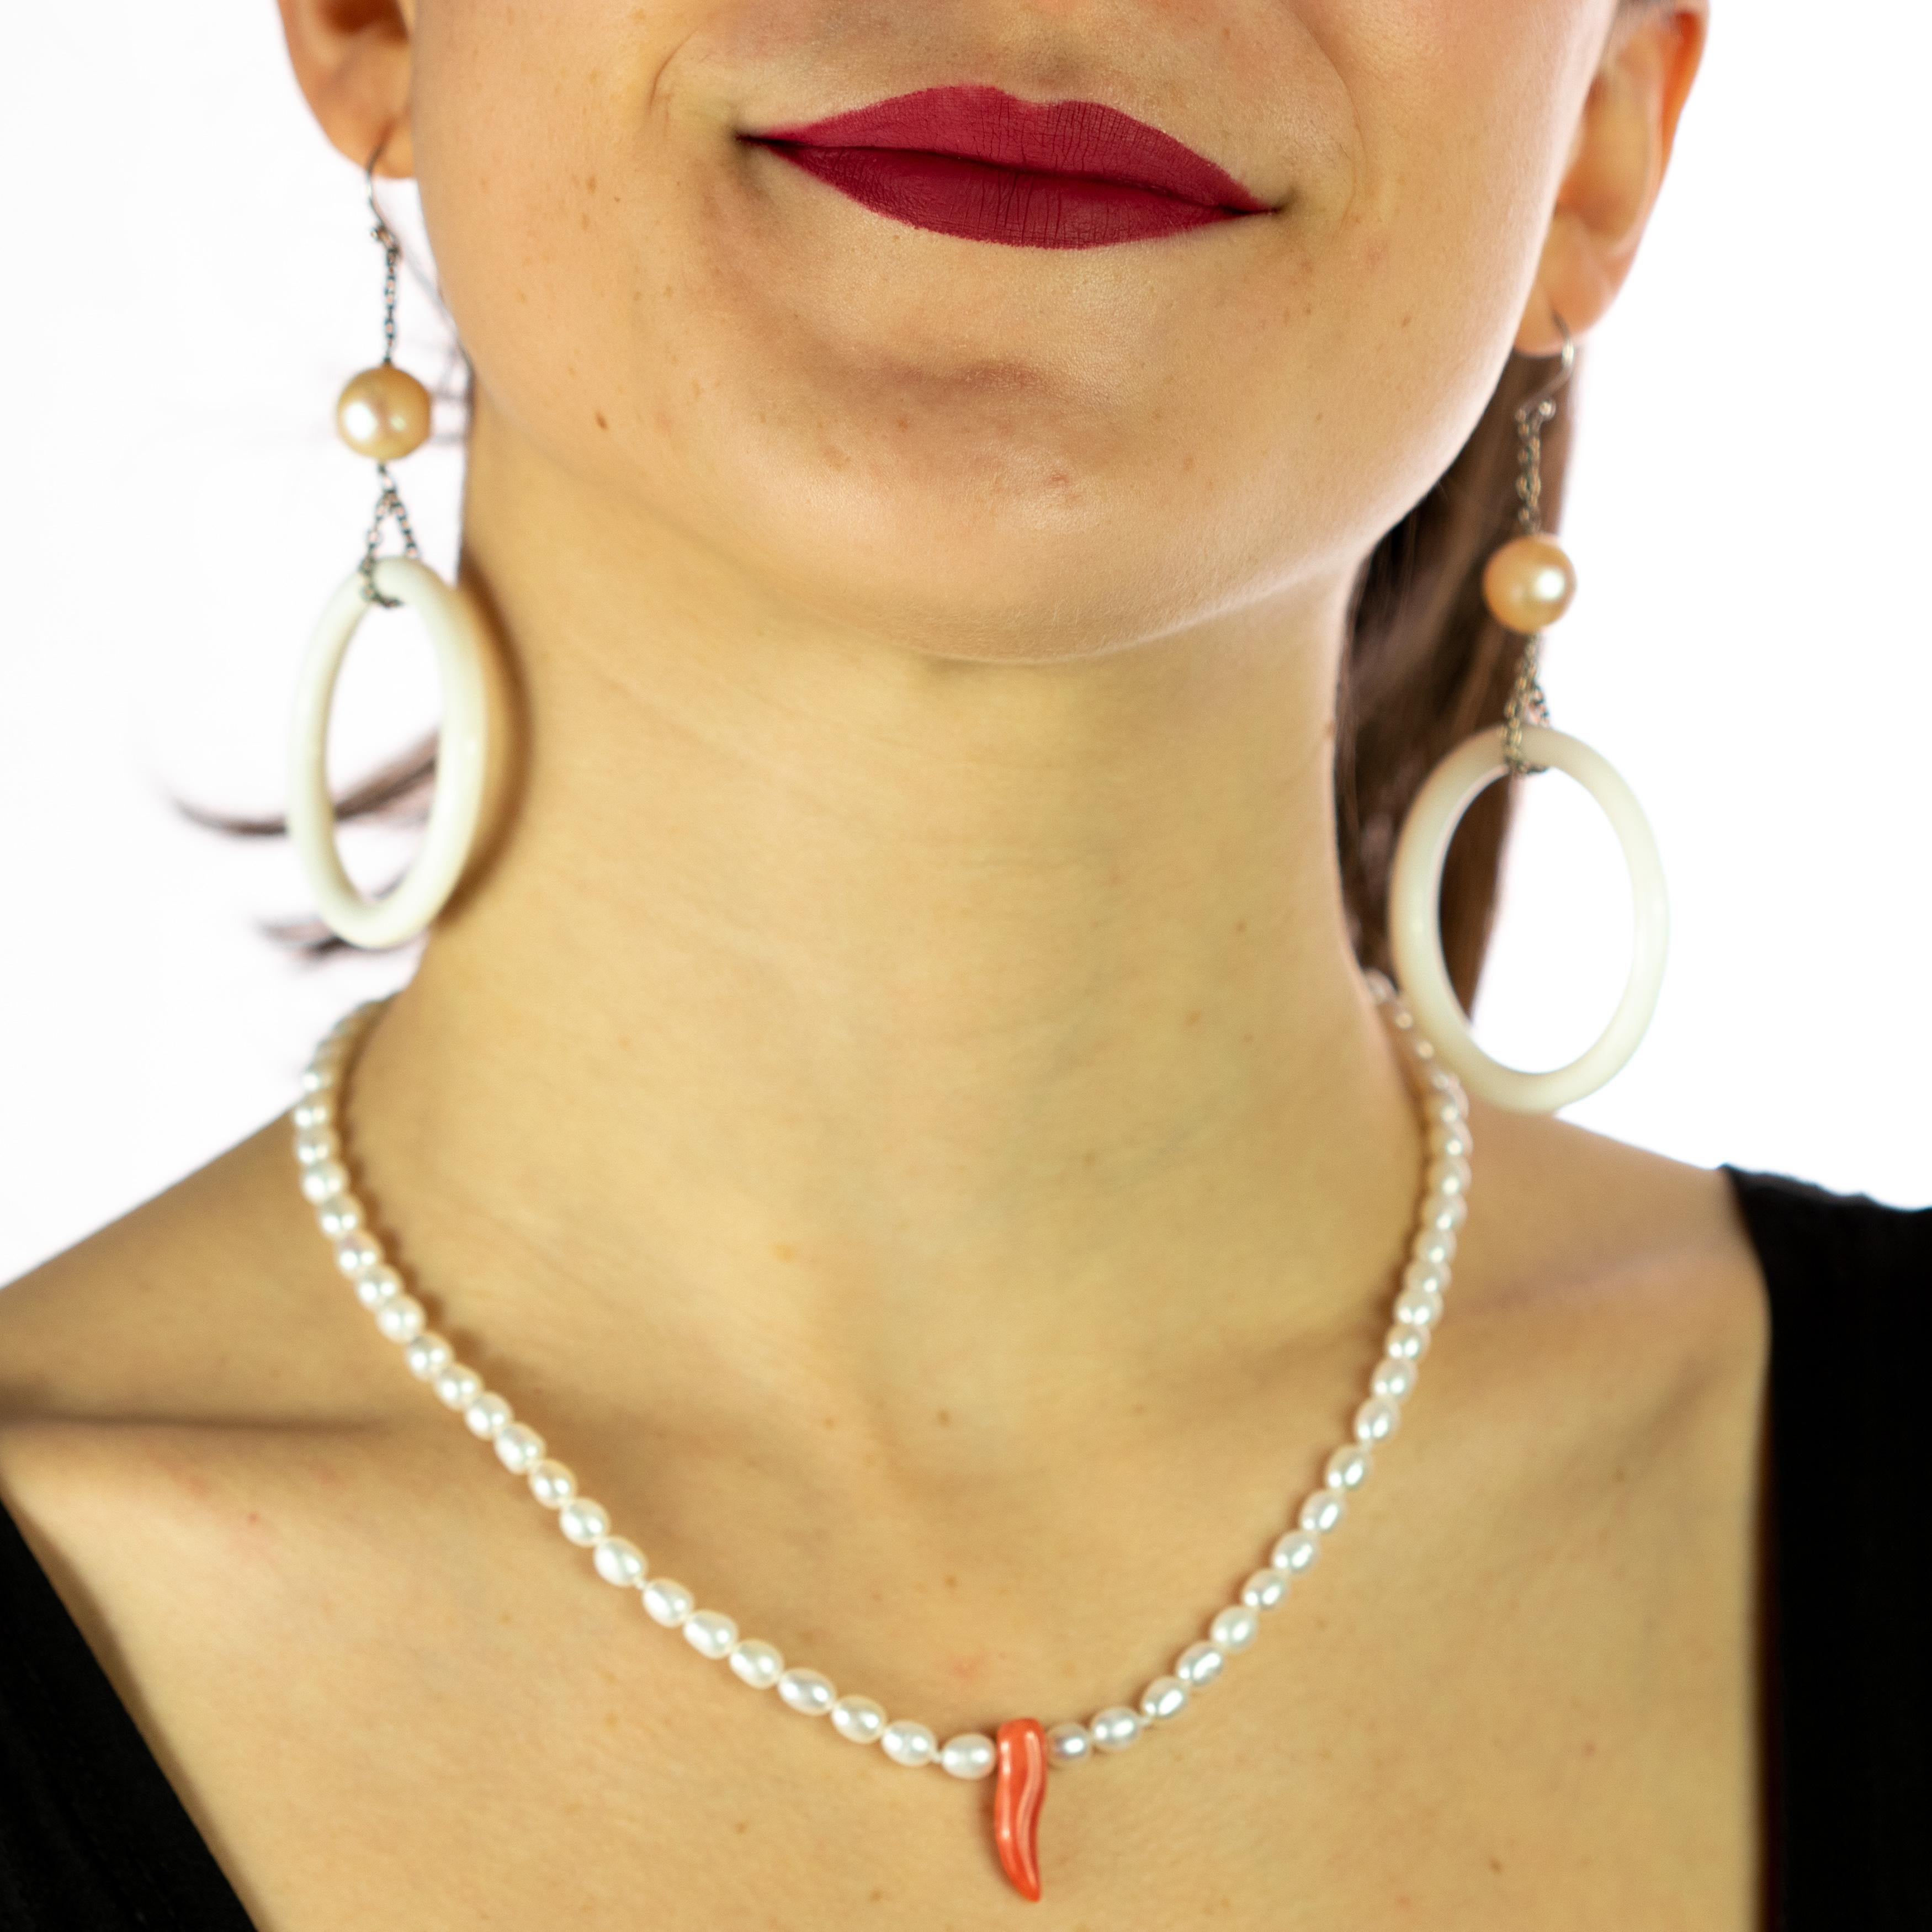 An elegant and light weighted freshwater pearl necklace with a unique design with a central pendant in red coral. Immerse yourself in the beauty of this uniquely designed jewel with natural stones full of life and color. A handmade hawaiian